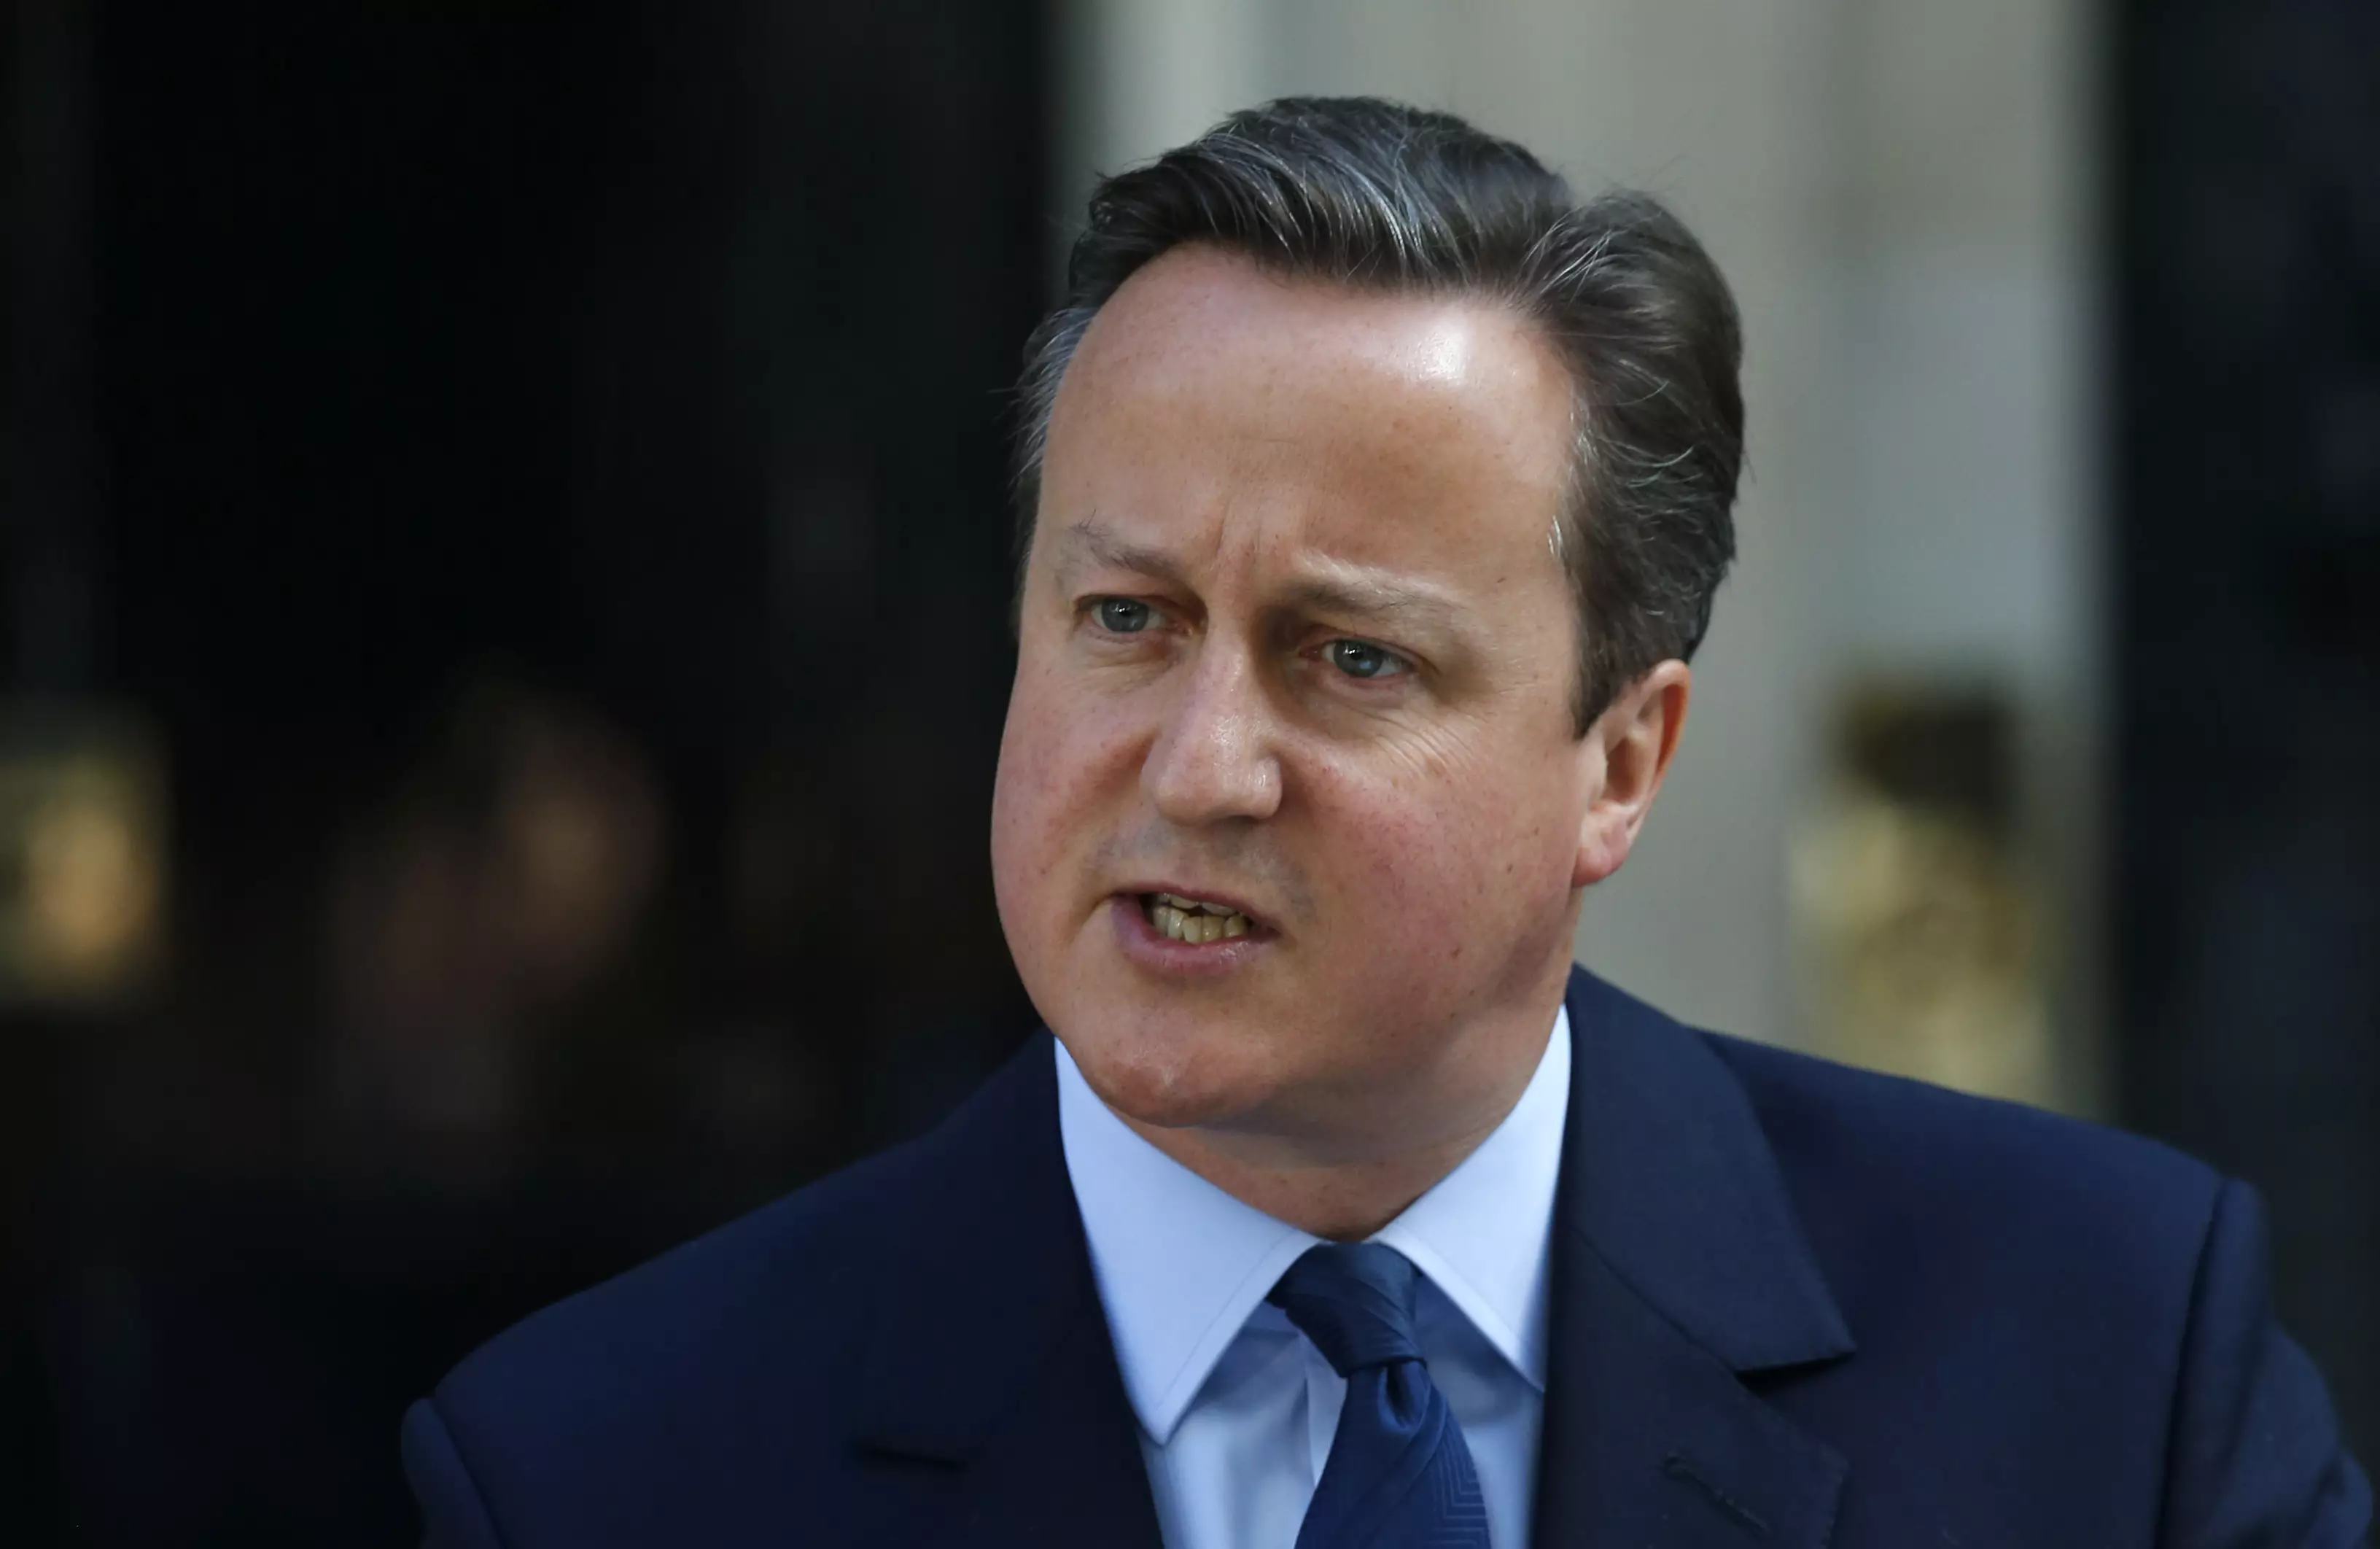 David Cameron To Quit As Prime Minister Following Crushing Defeat